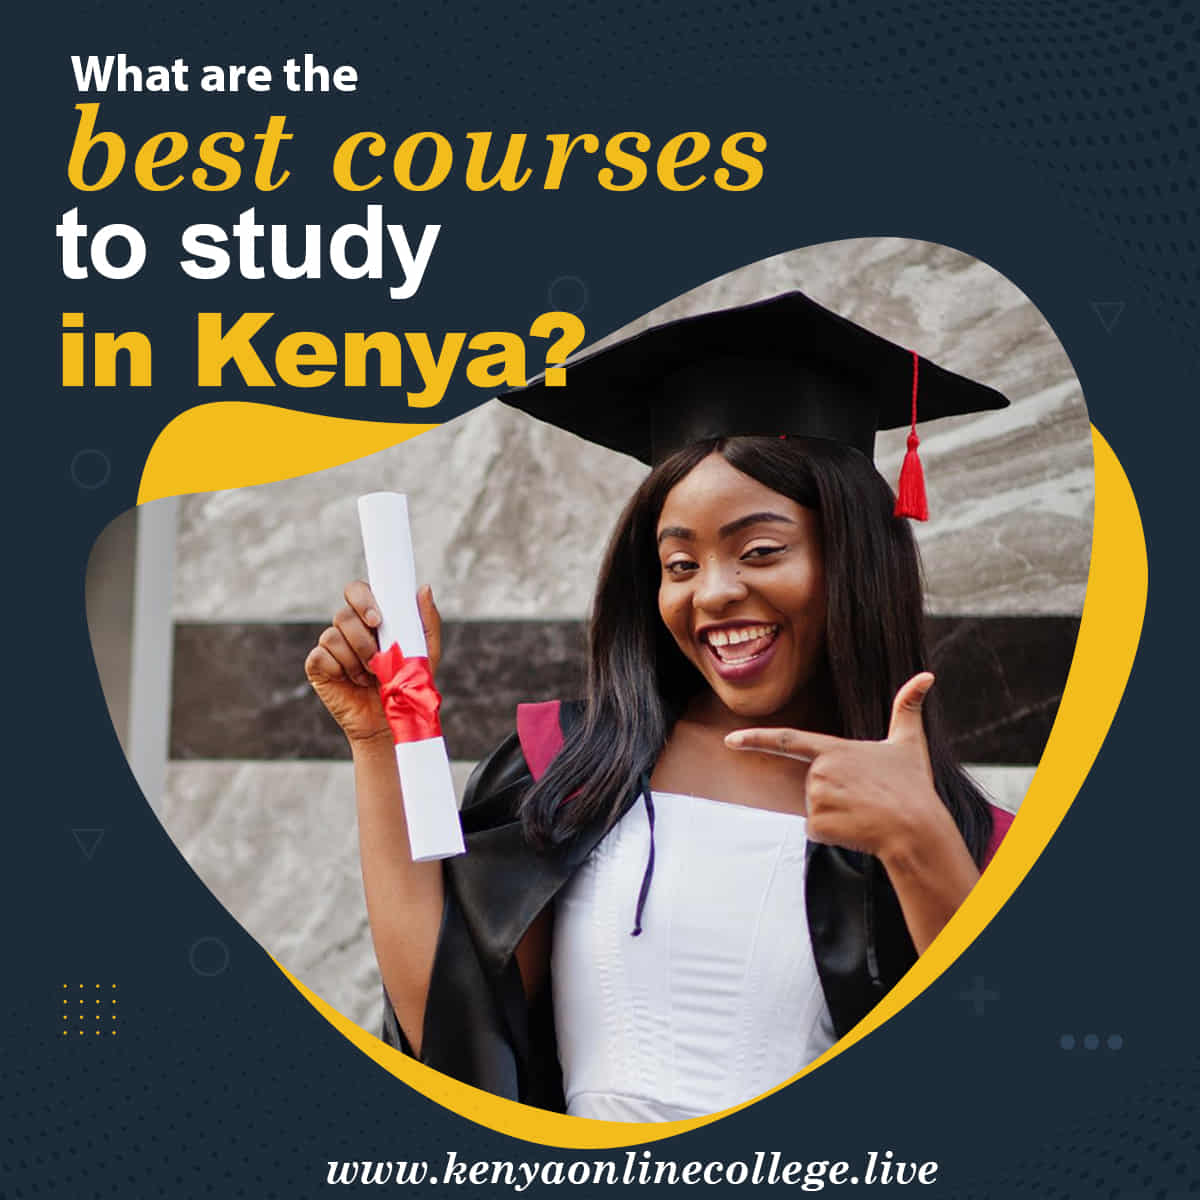 What are the best courses to study in Kenya?